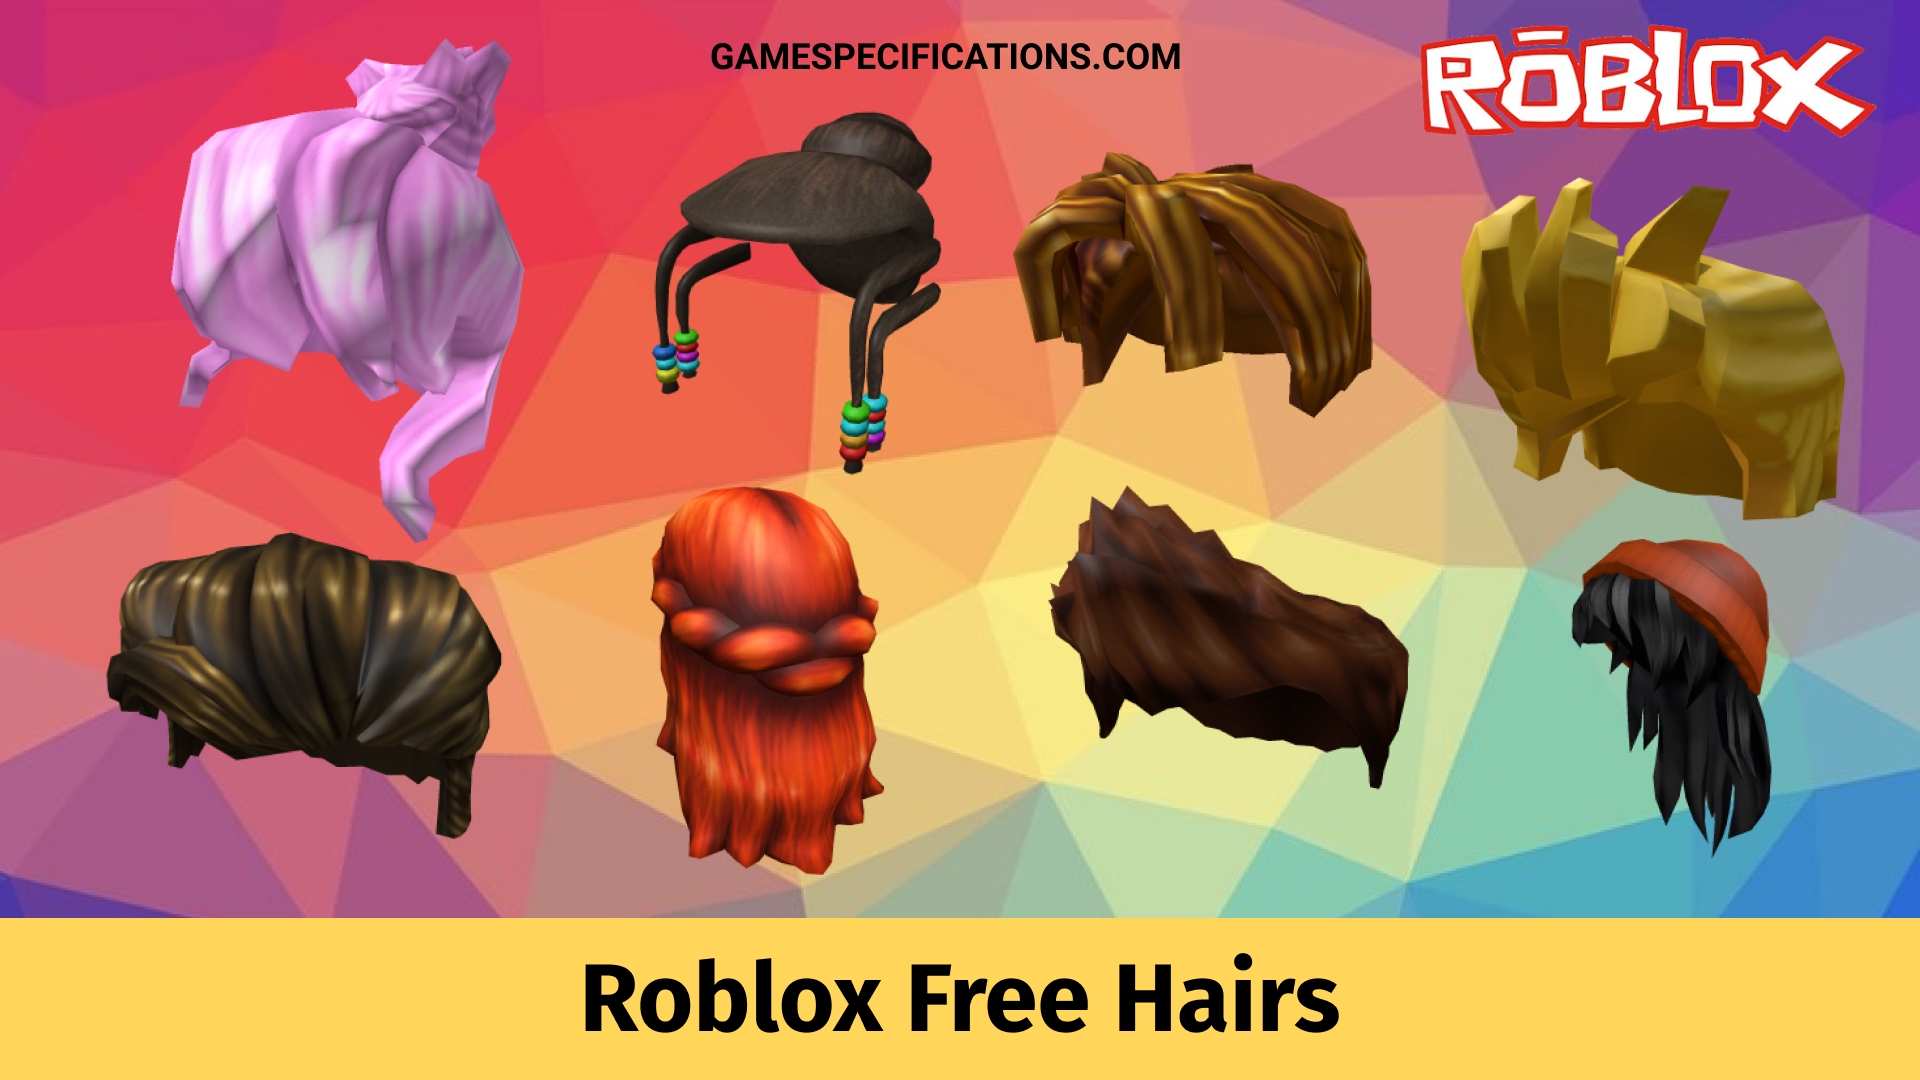 Roblox Free Hairs For Awesome Aesthetics Game Specifications - hair mesh roblox